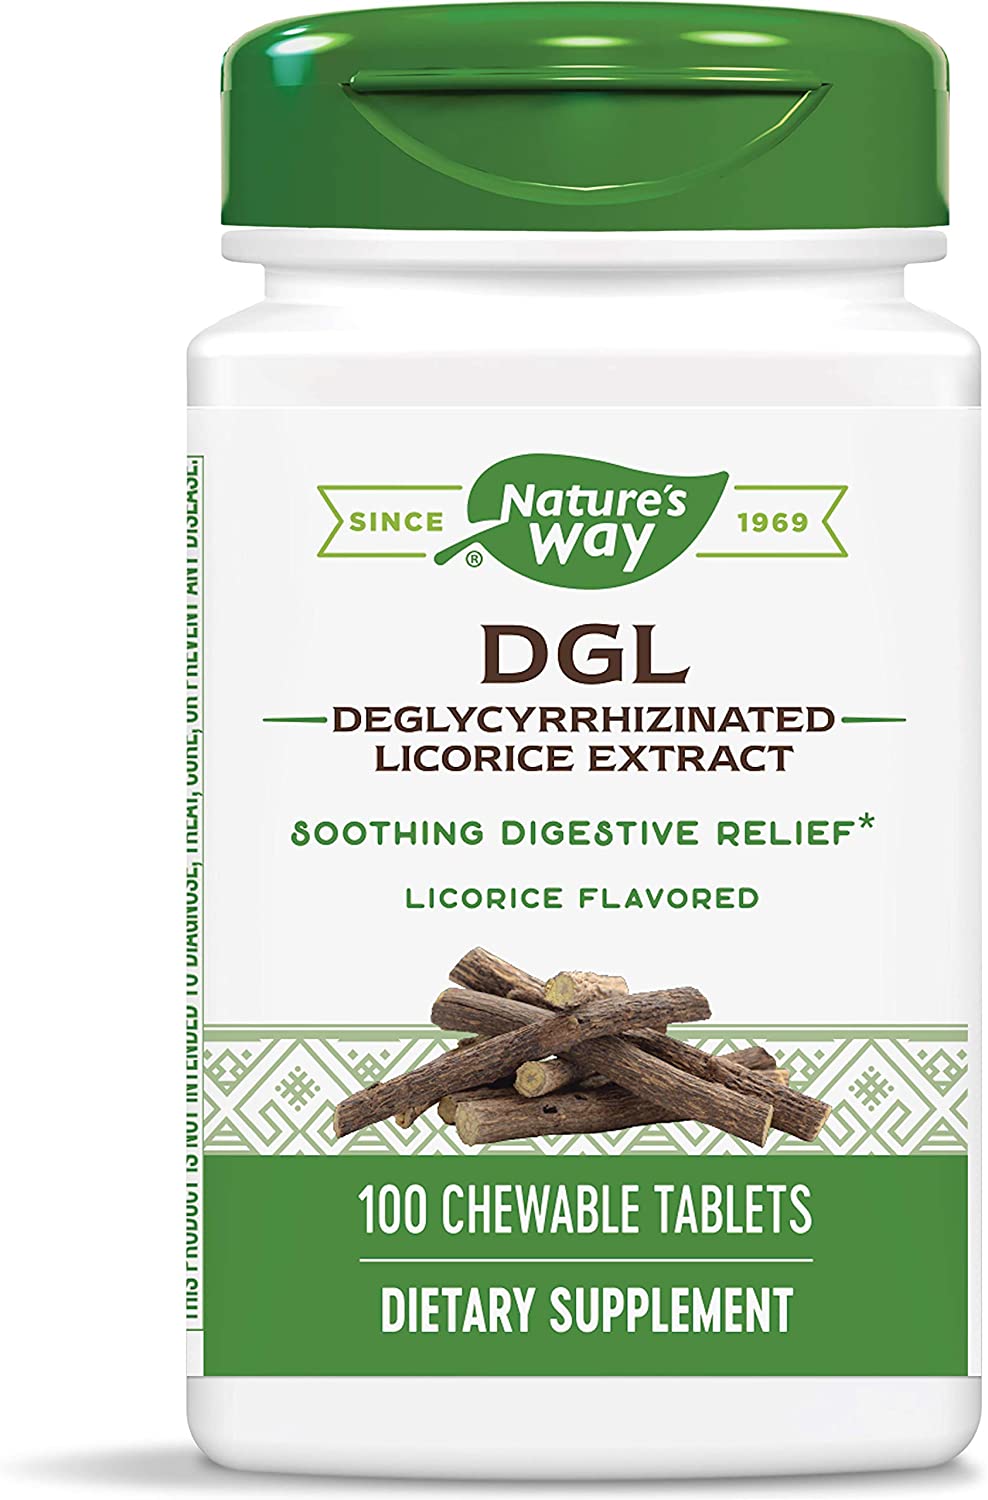 DGL 100 chewable tablets by Nature's Way